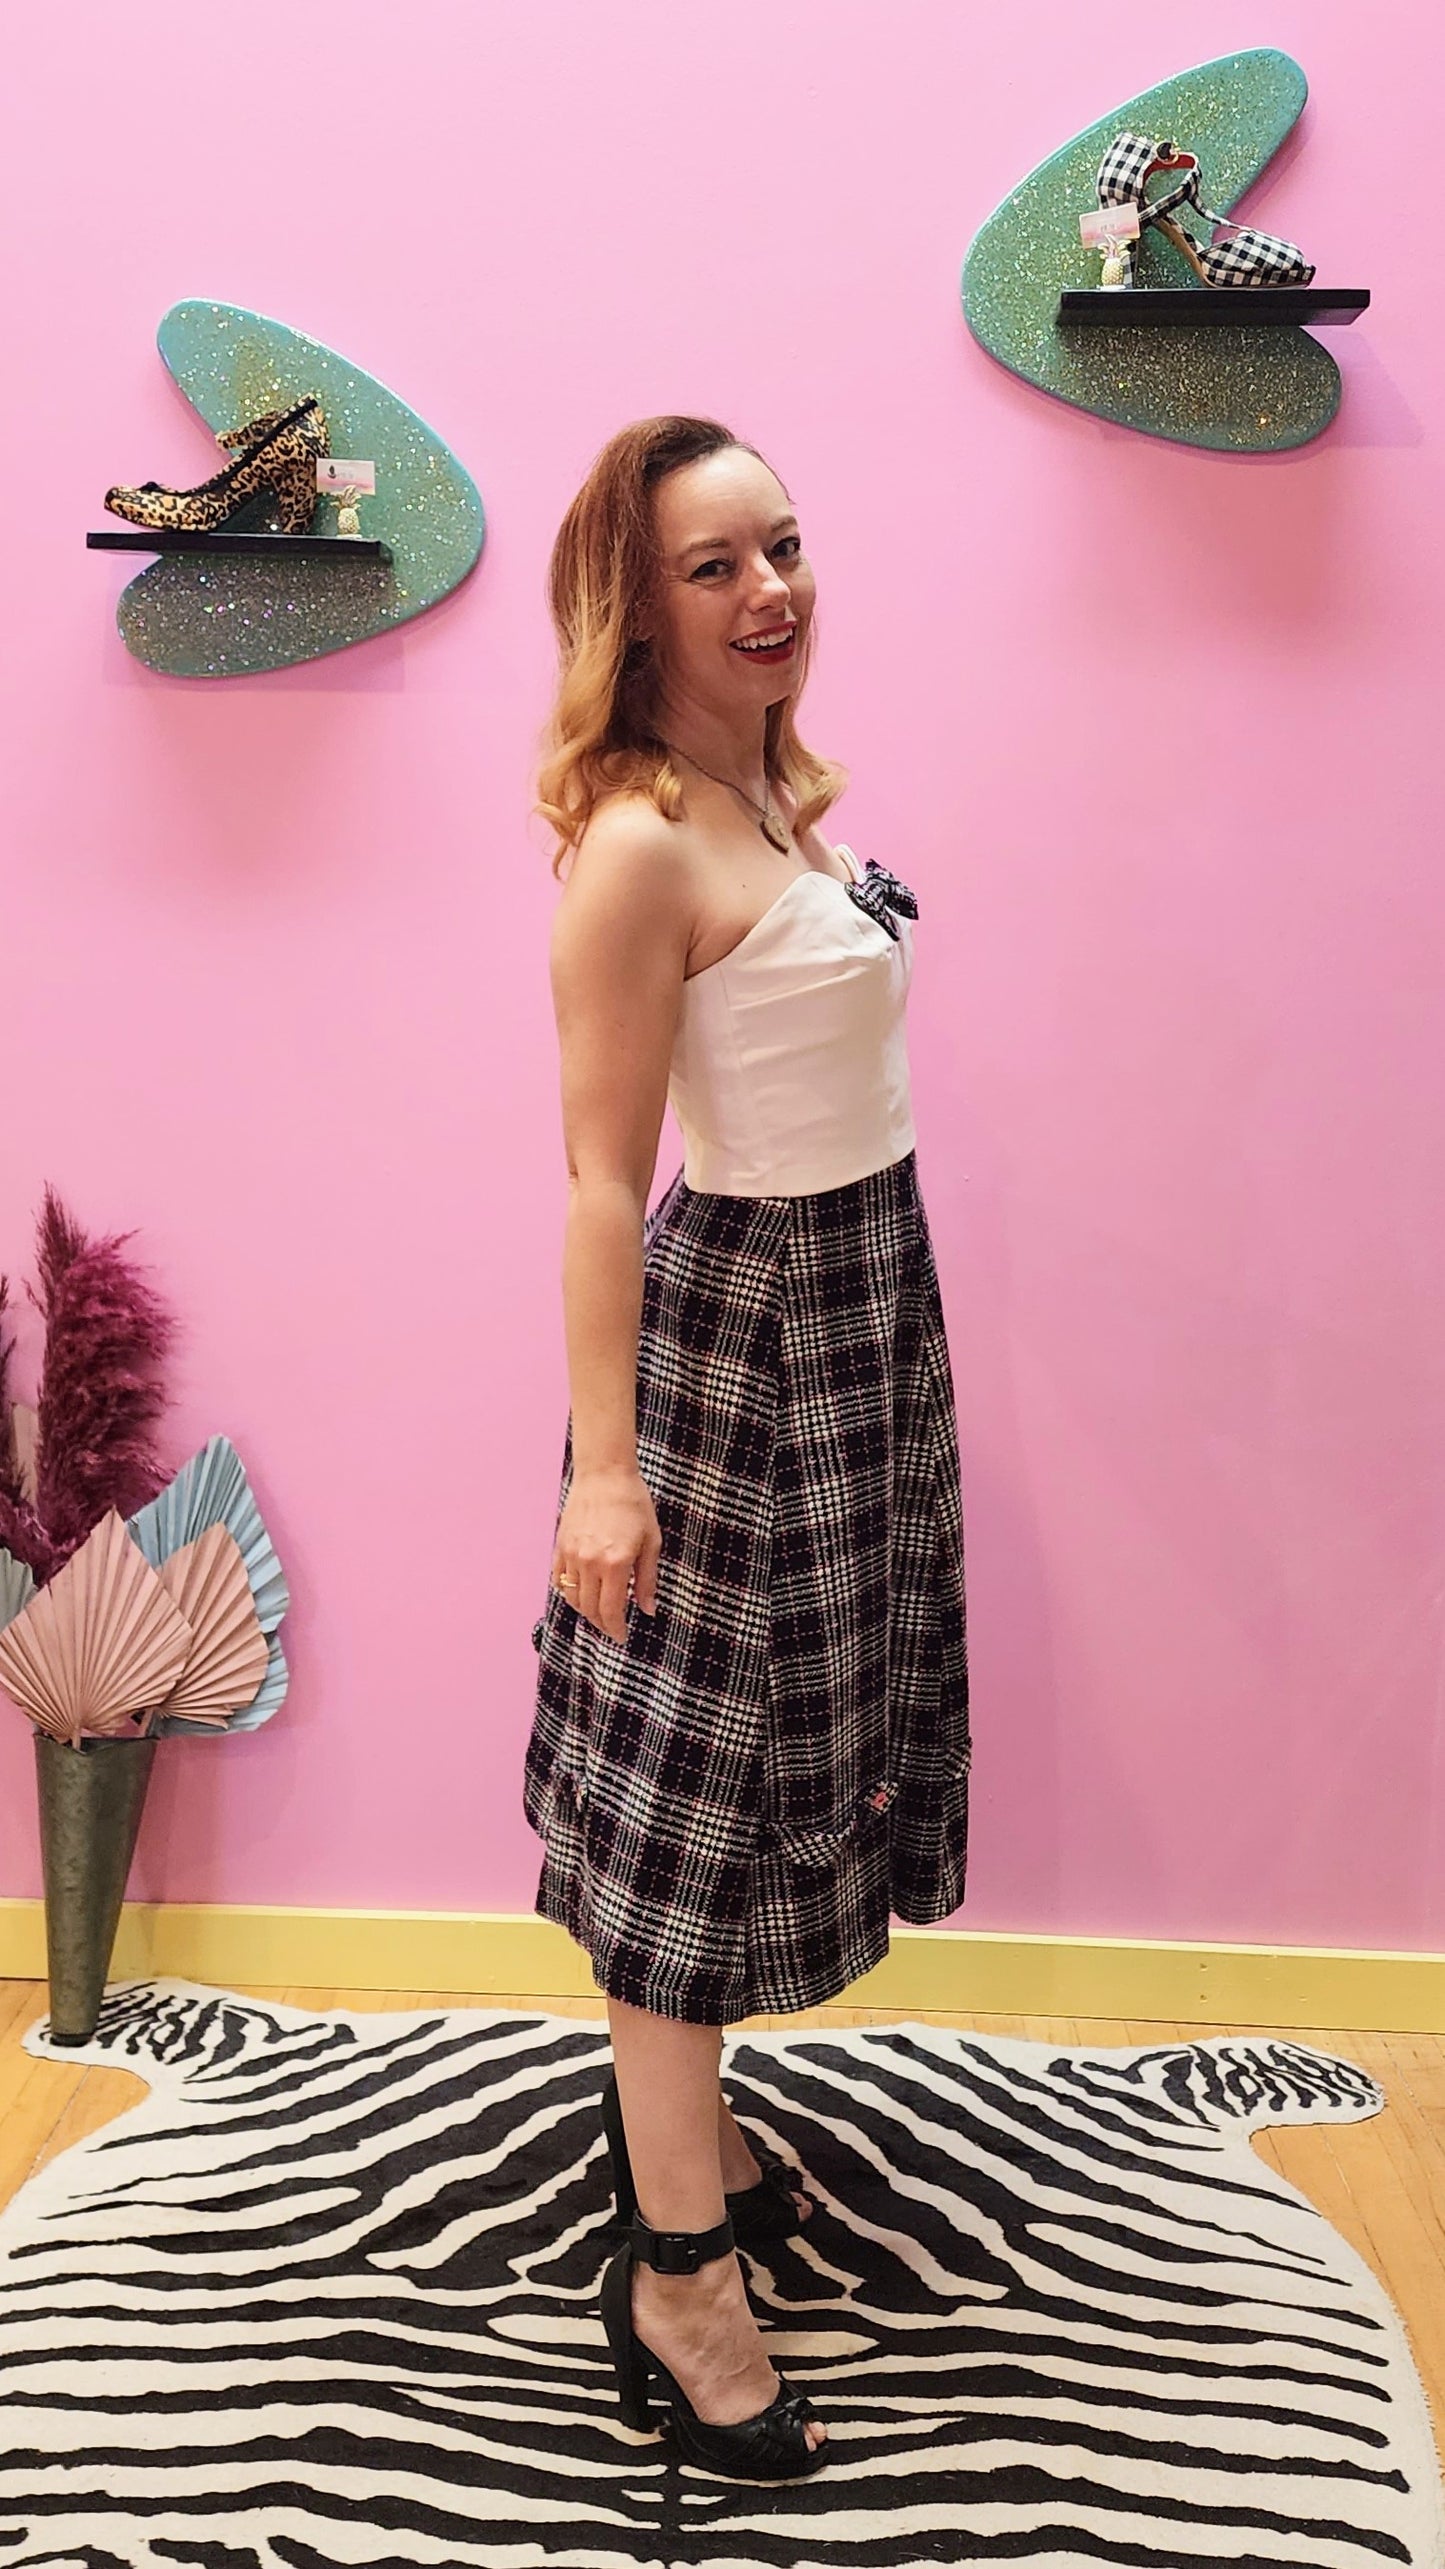 Top and Skirt Two-Piece Outfit by Neon Plum Pinup Clothing